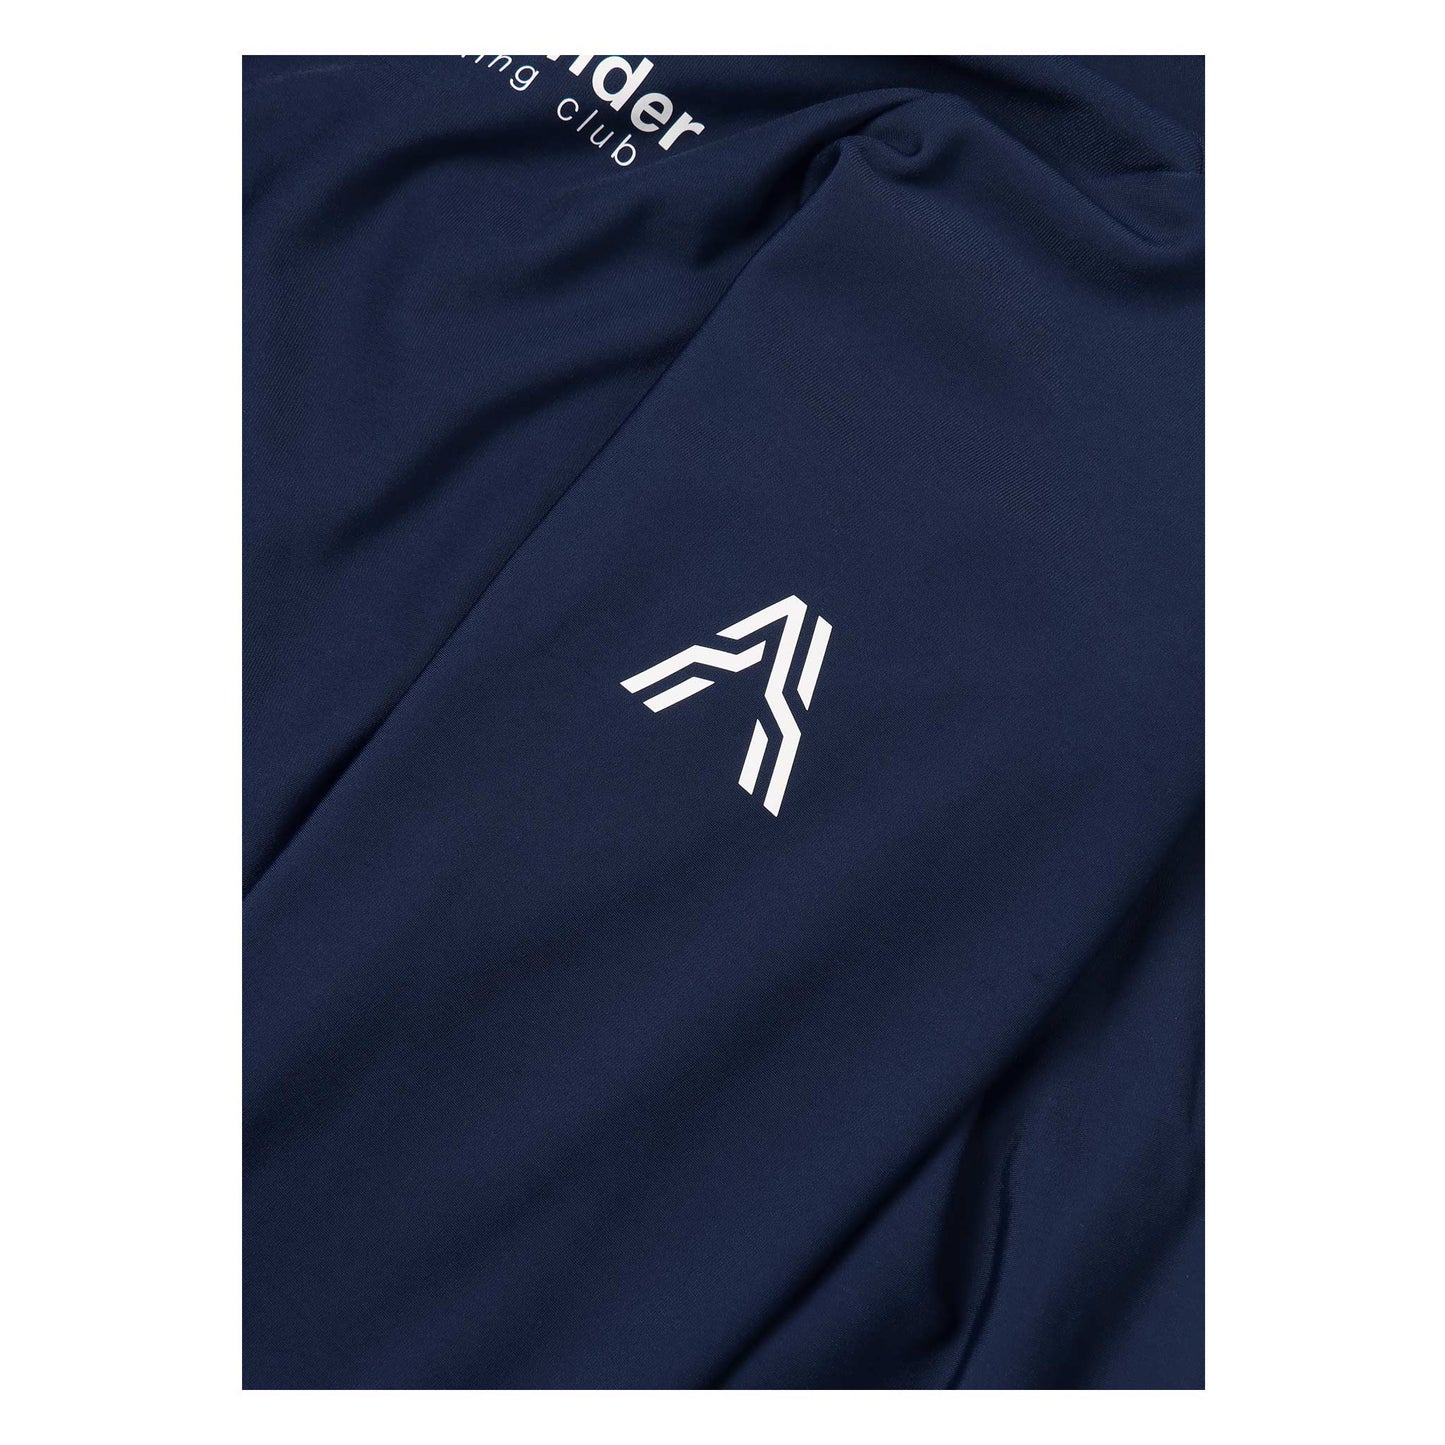 Milano Thermal Long Sleeve Jersey Navy from Ascender Cycling Club Zürich Switzerland Logo on Sleeves View